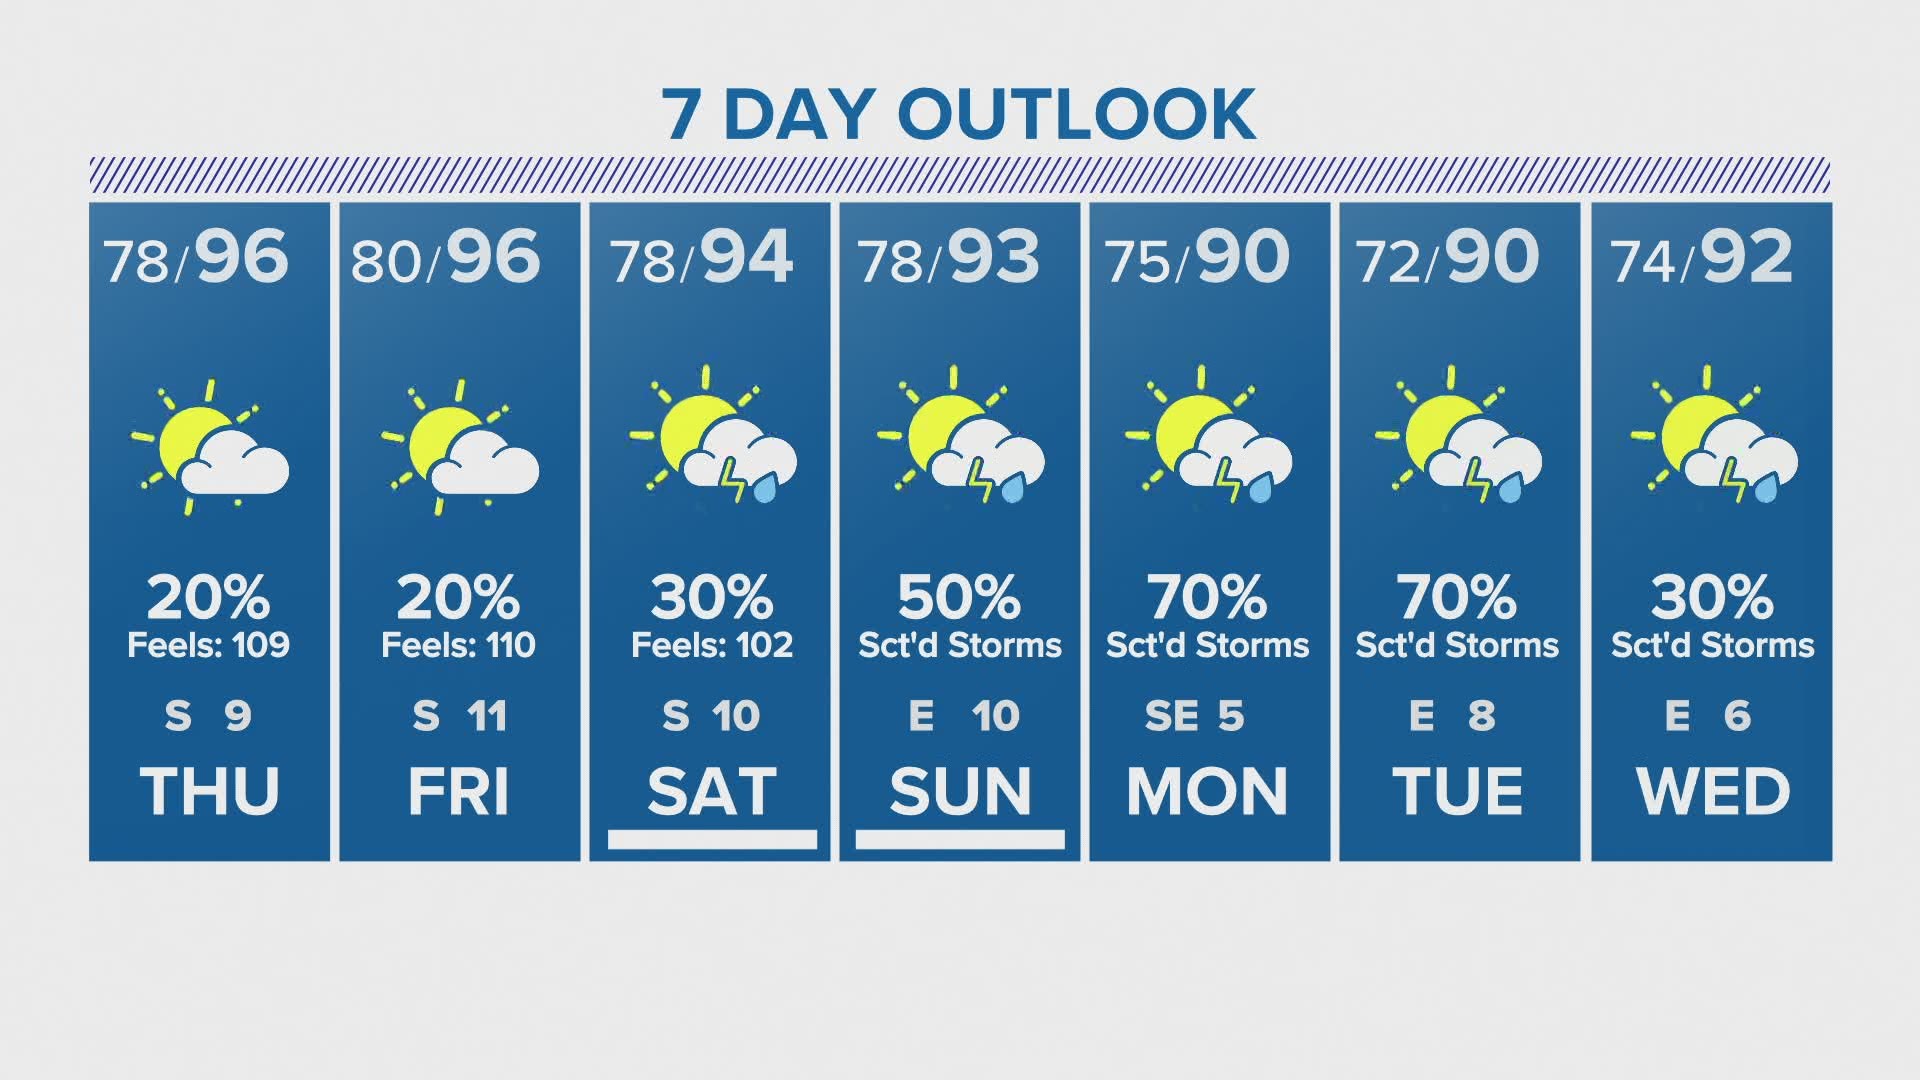 Rain chances stay low until the weekend as humidity levels rise the rest of the week, according to Meteorologist Addison Green.